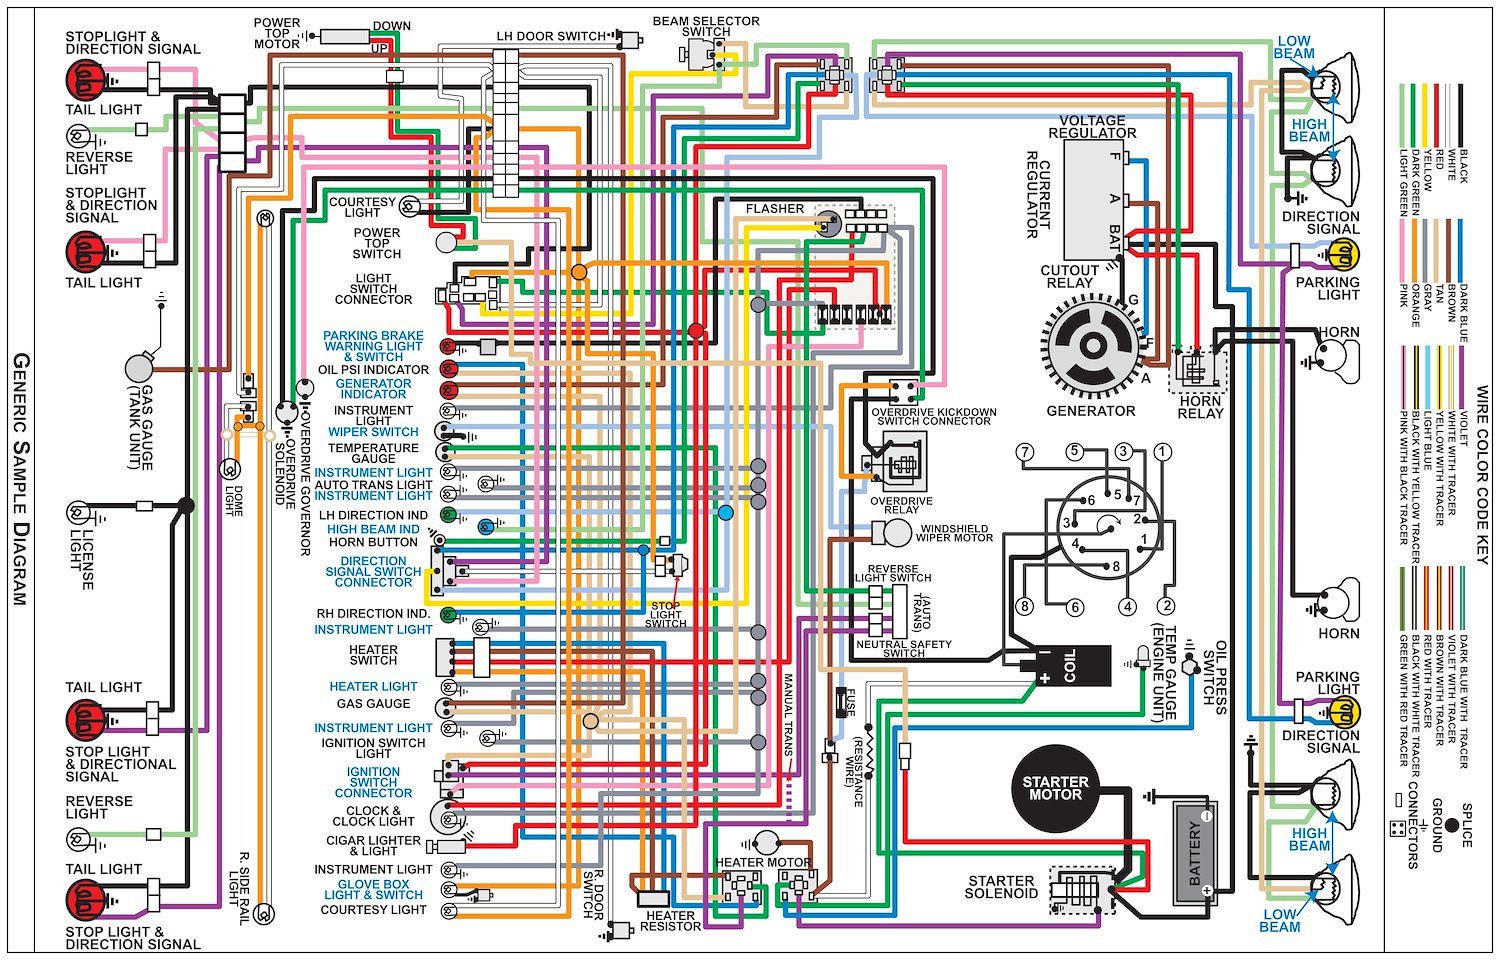 Wiring Diagram for 1969 Ford F-Series Truck, 11 in x 17 in., Laminated